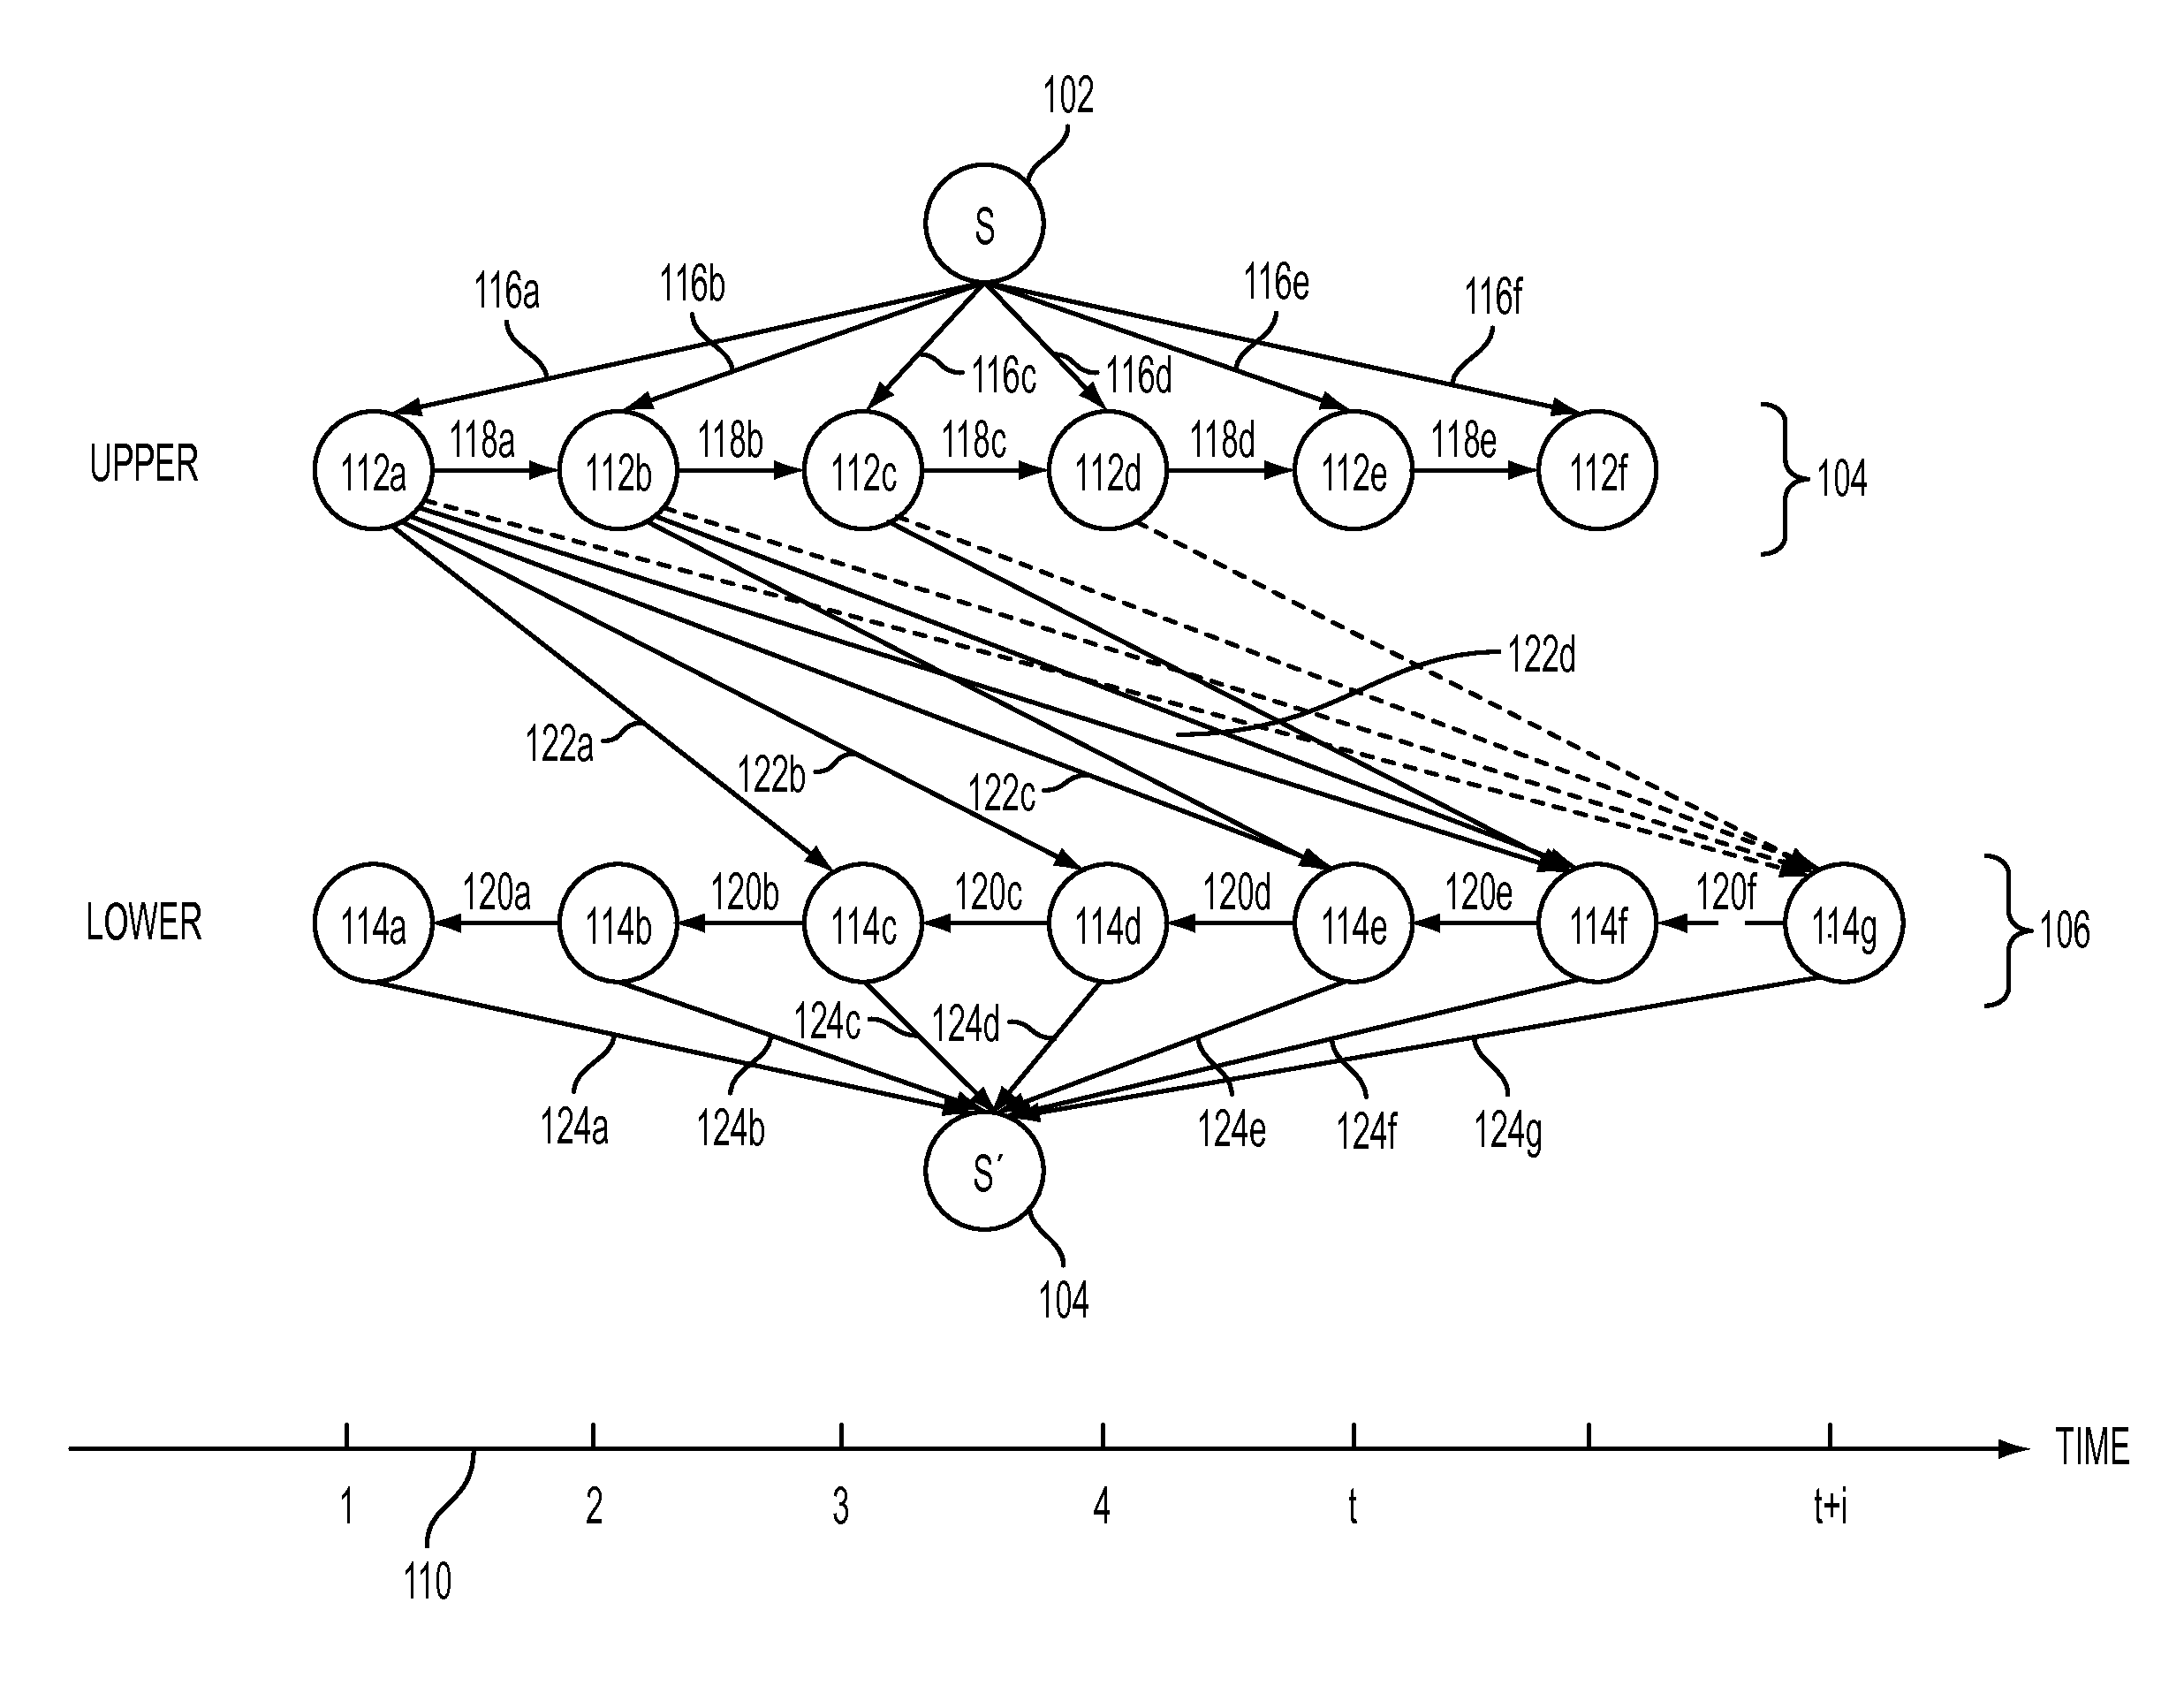 Dynamic vehicle routing in multi-stage distribution networks